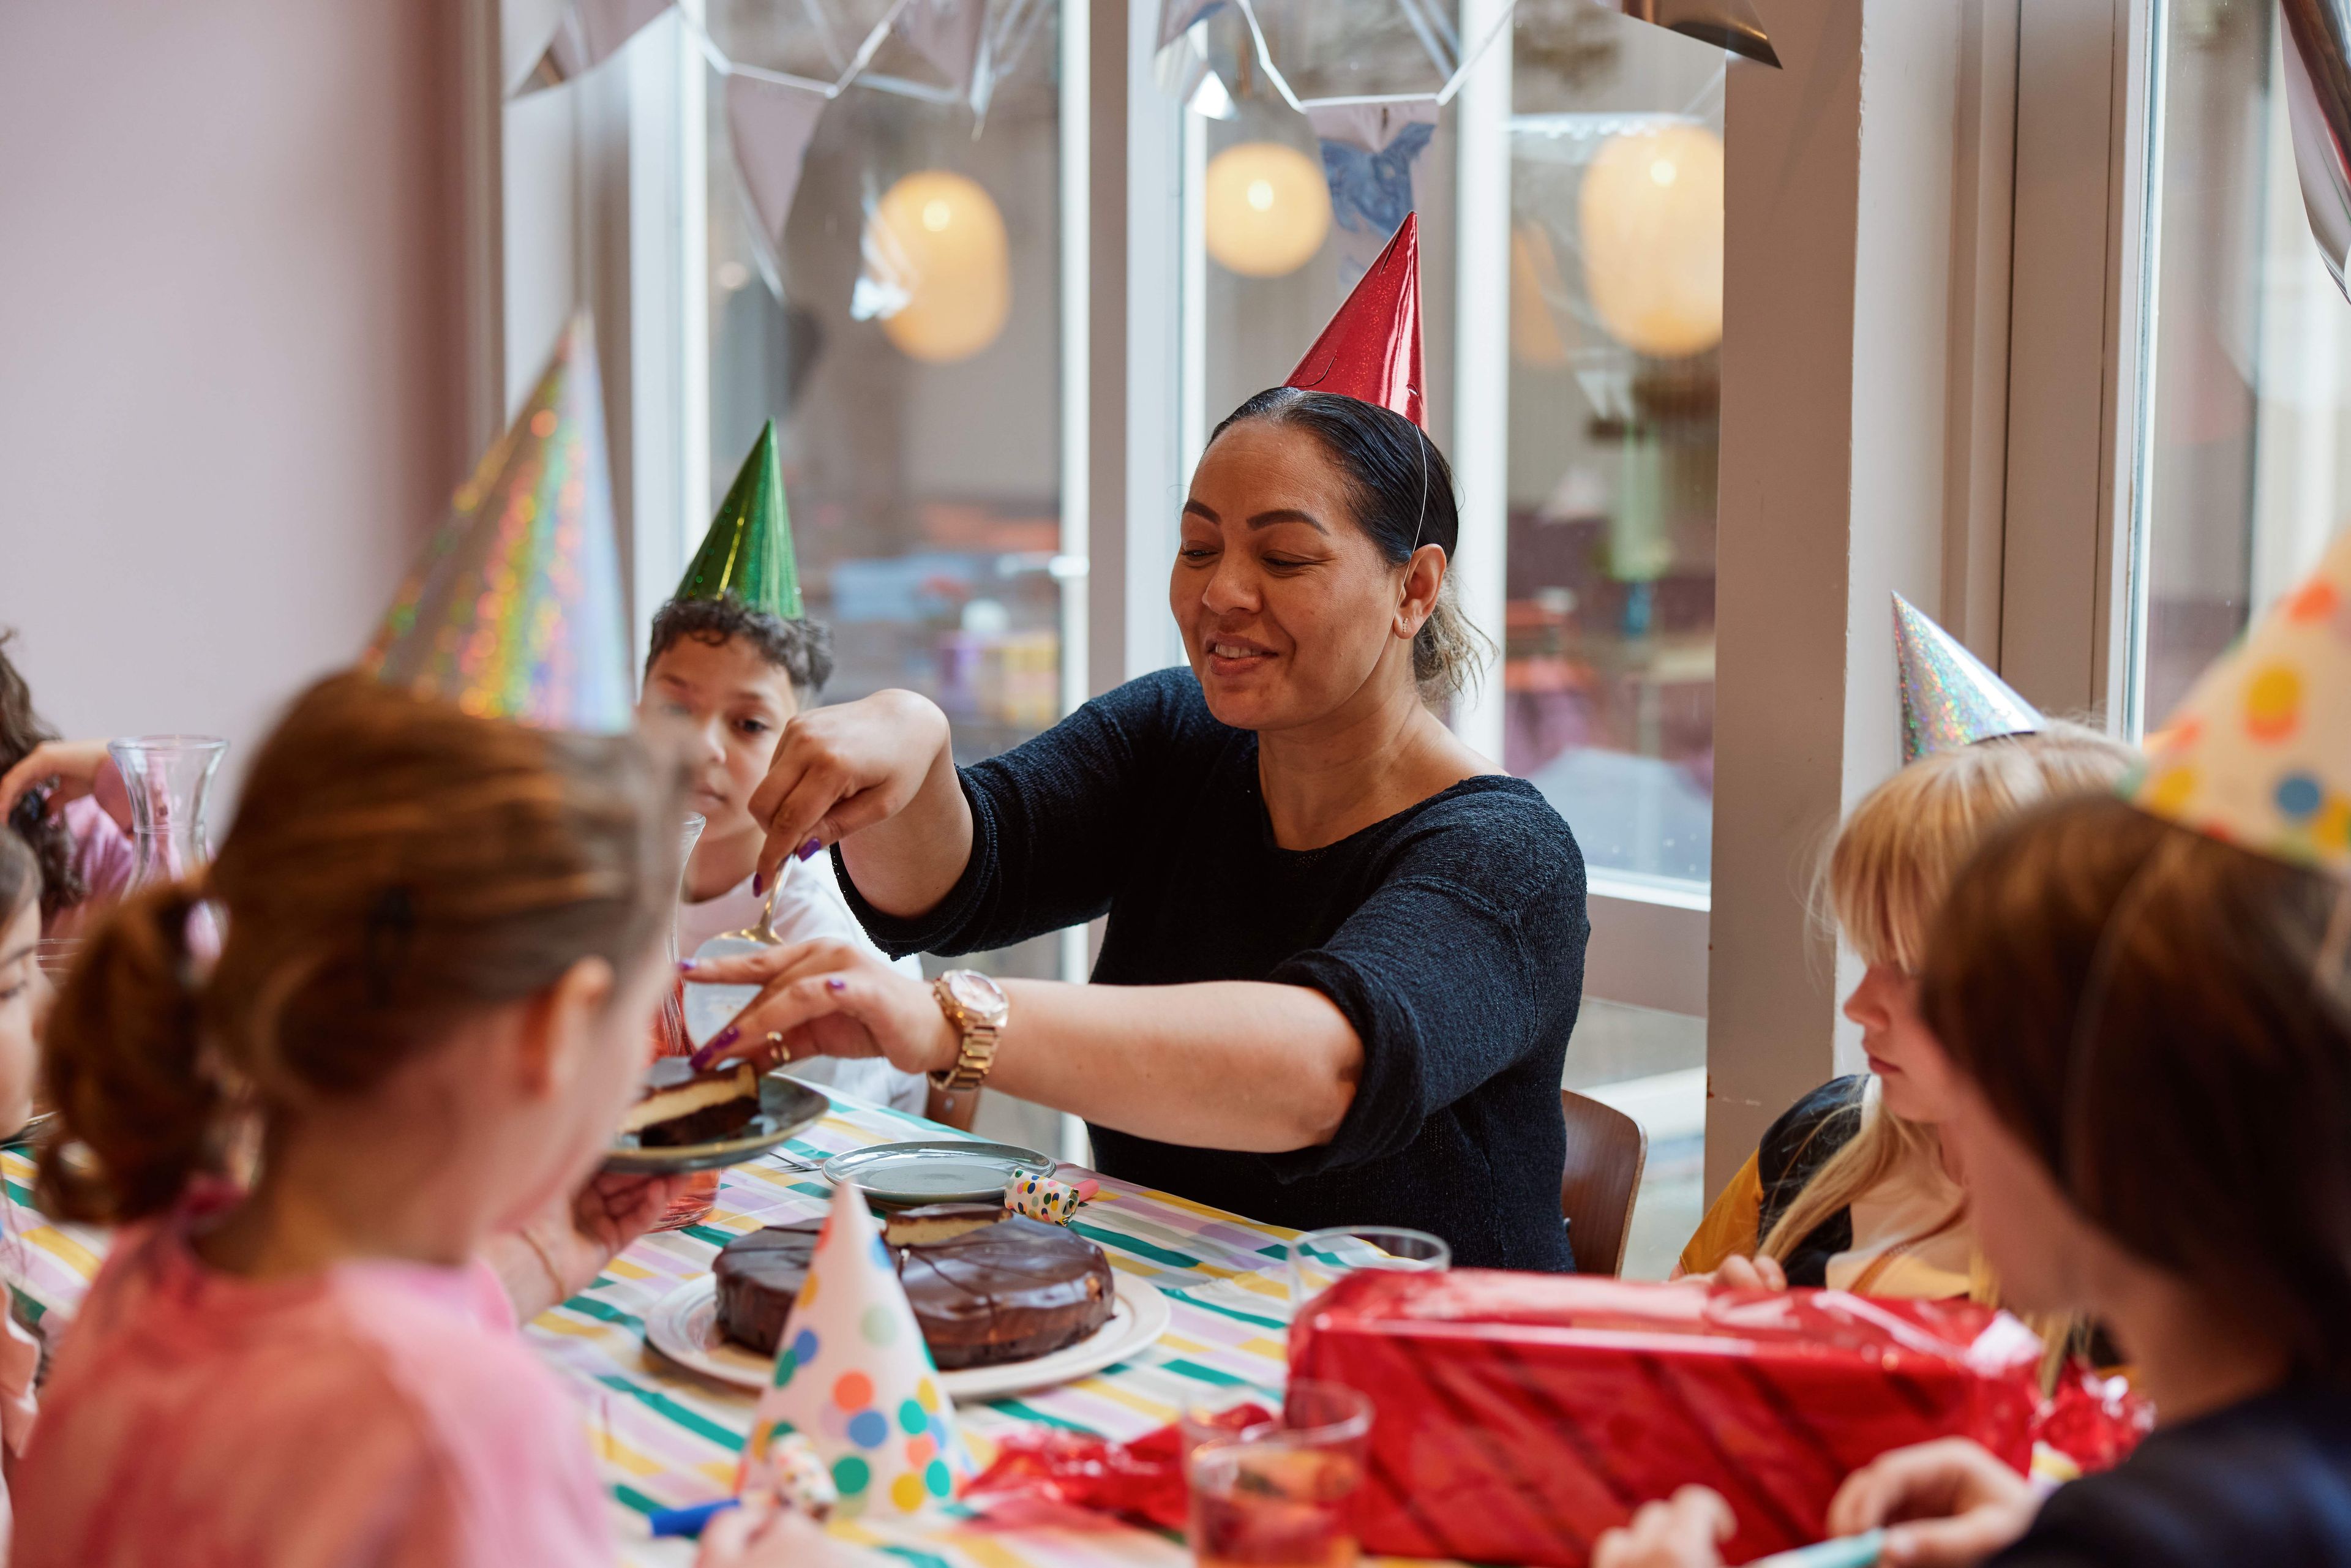 Children celebrate a birthday at the Frans Hals Museum and mother cuts the cake.